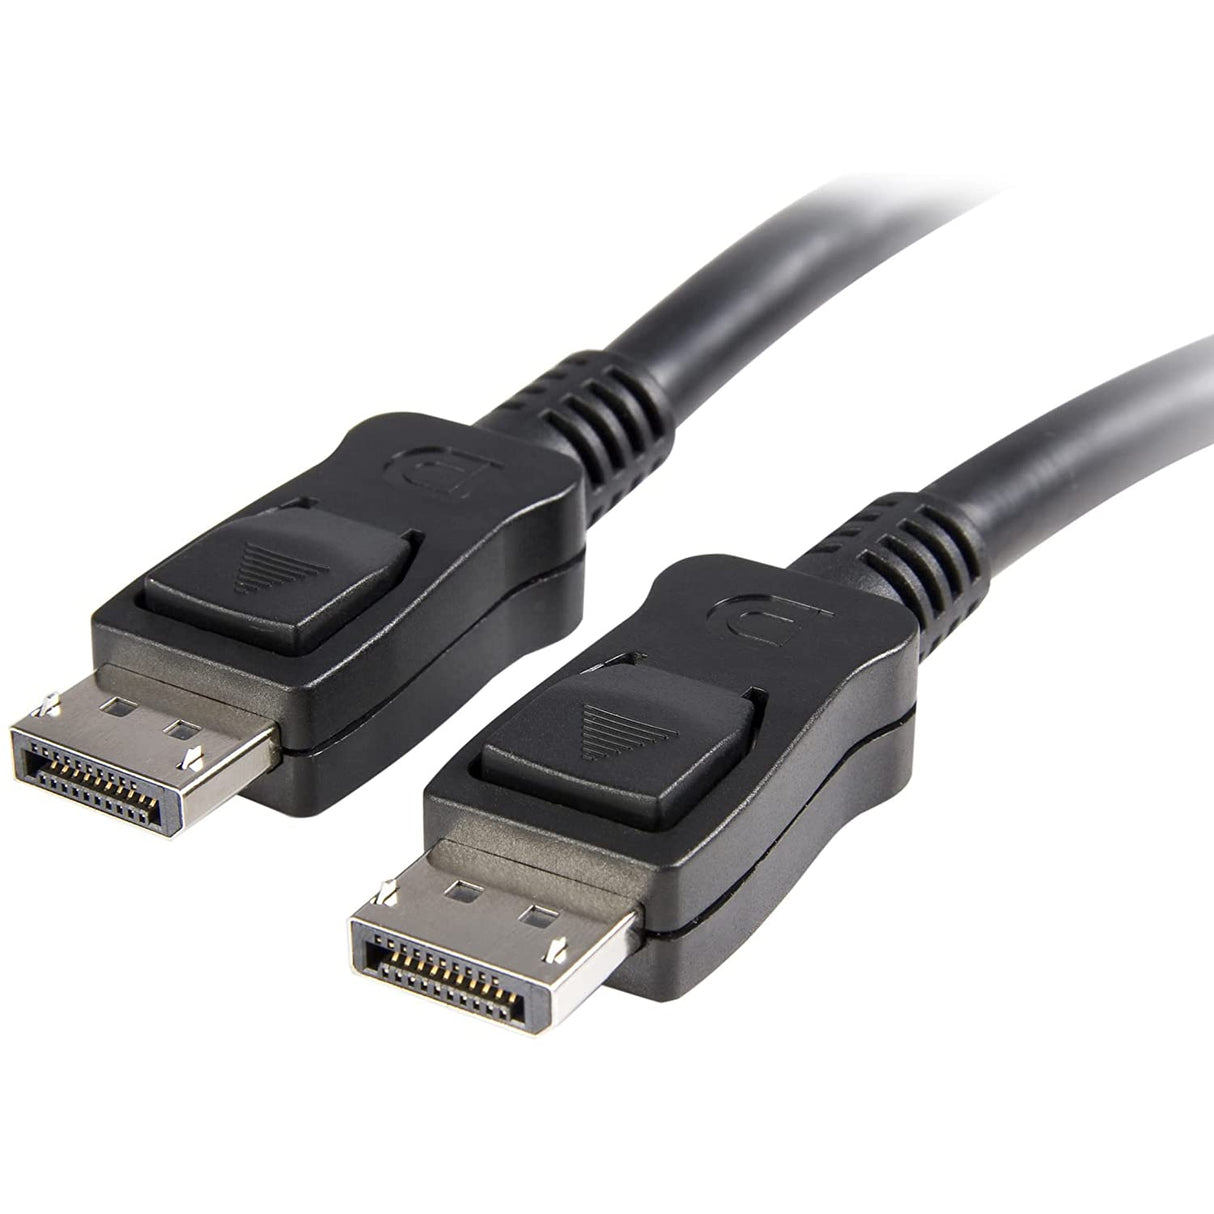 StarTech.com 15 ft DisplayPort Cable with Latches - M/M Standard 15 ft